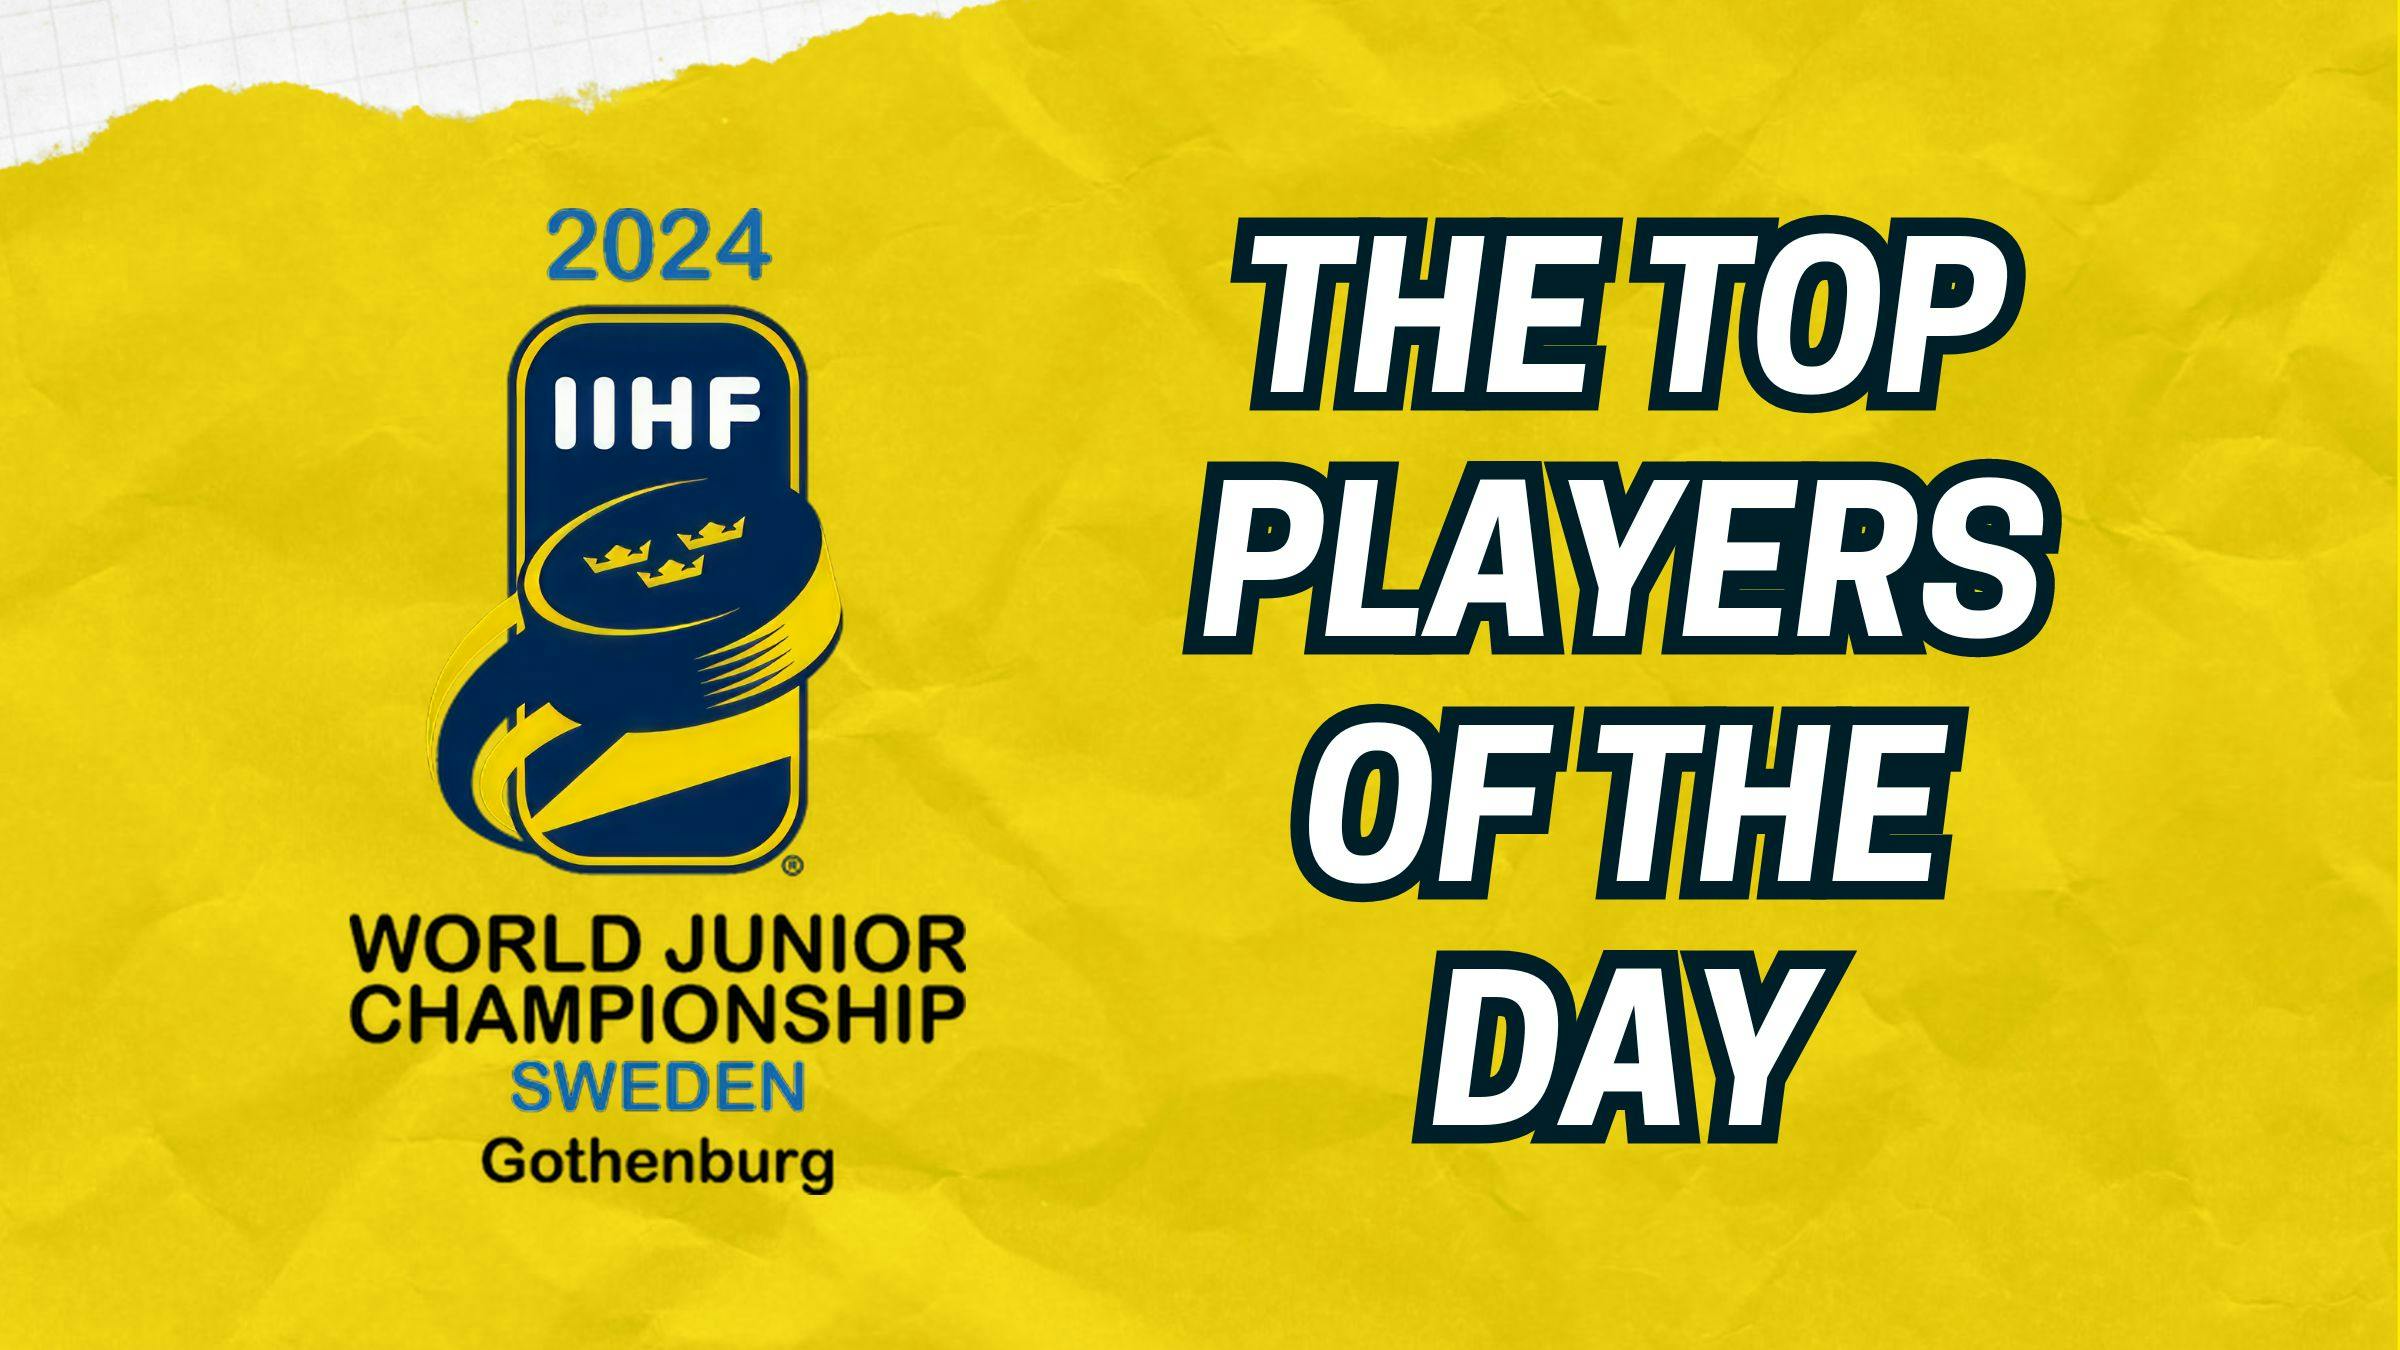 Top players from Day 3 of the 2024 World Junior Championship Daily